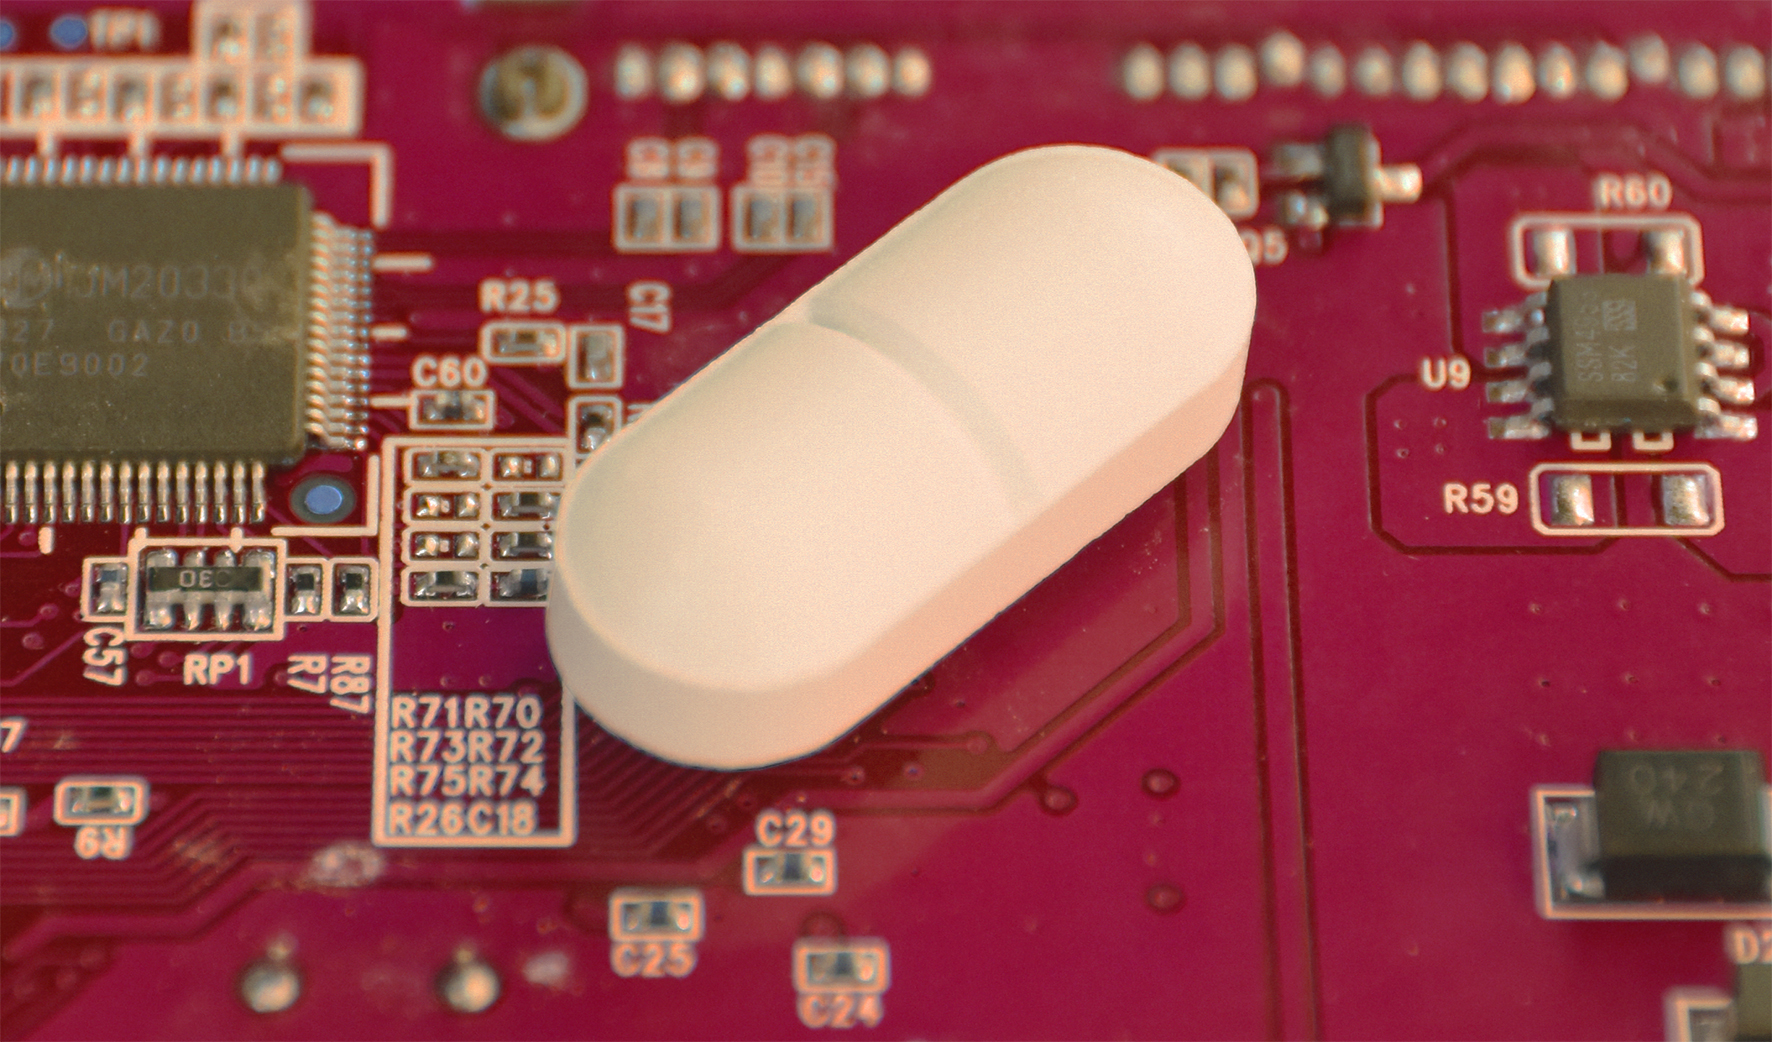 Circuit board and pill